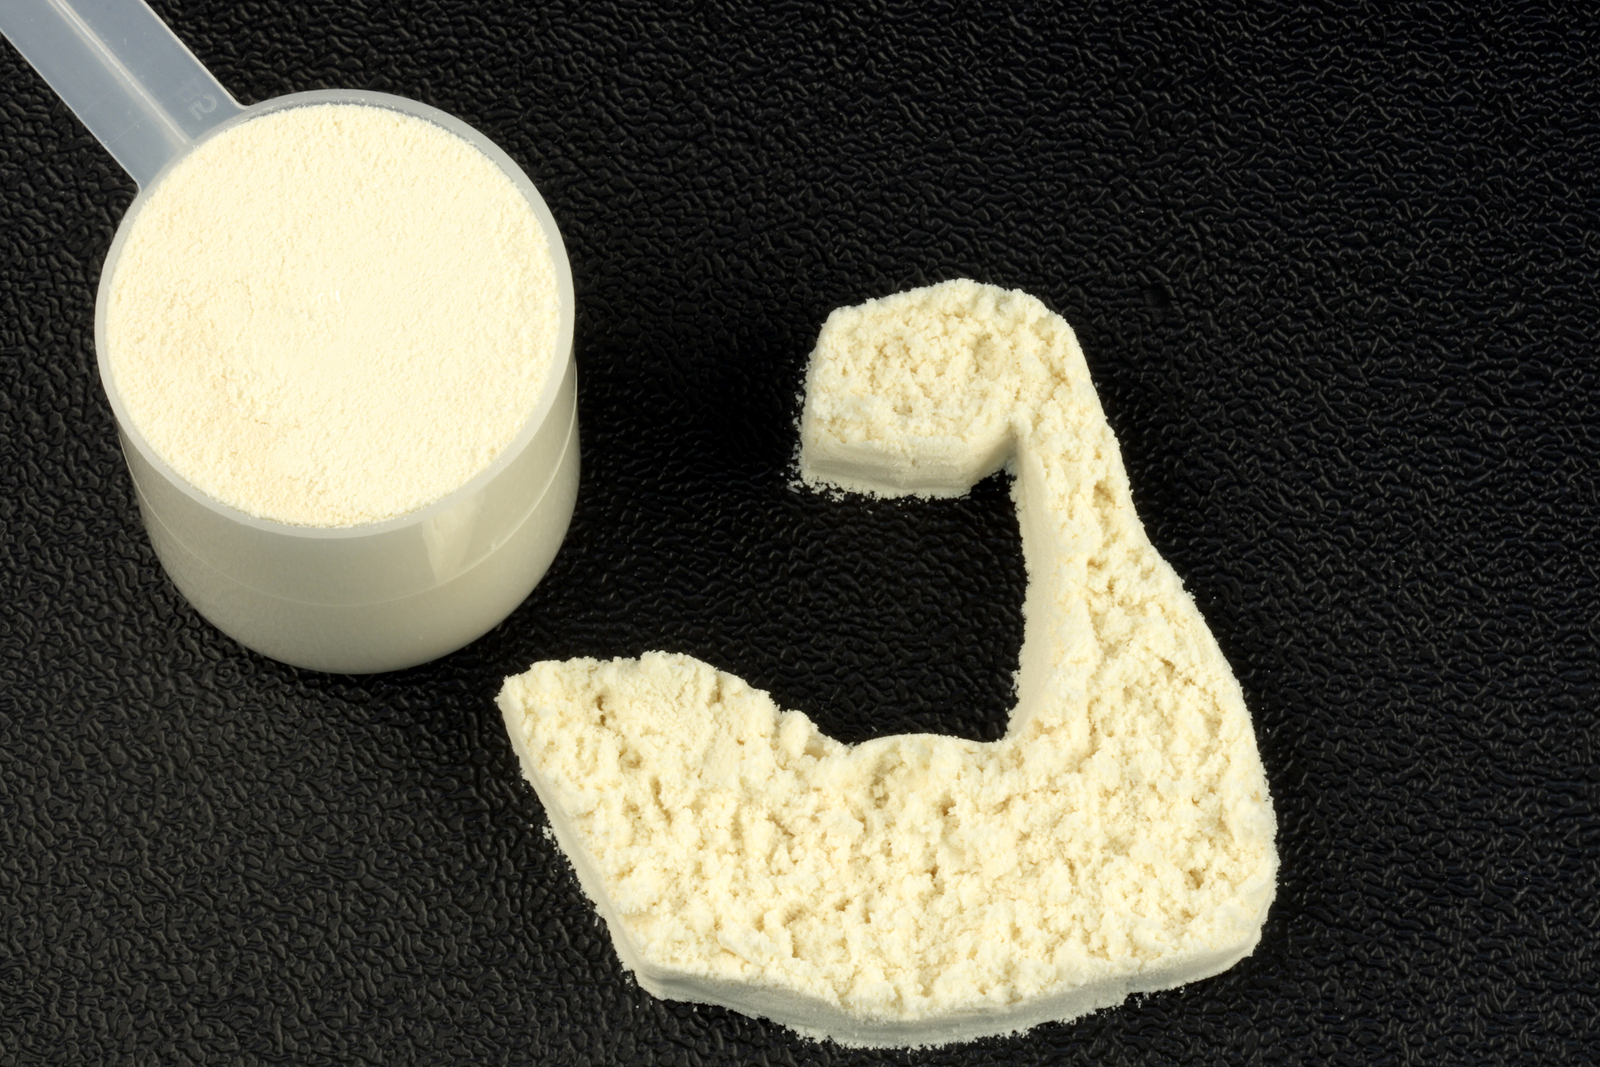 Whey Protein Pro #2: Increased Muscle Protein Synthesis Post-Workout